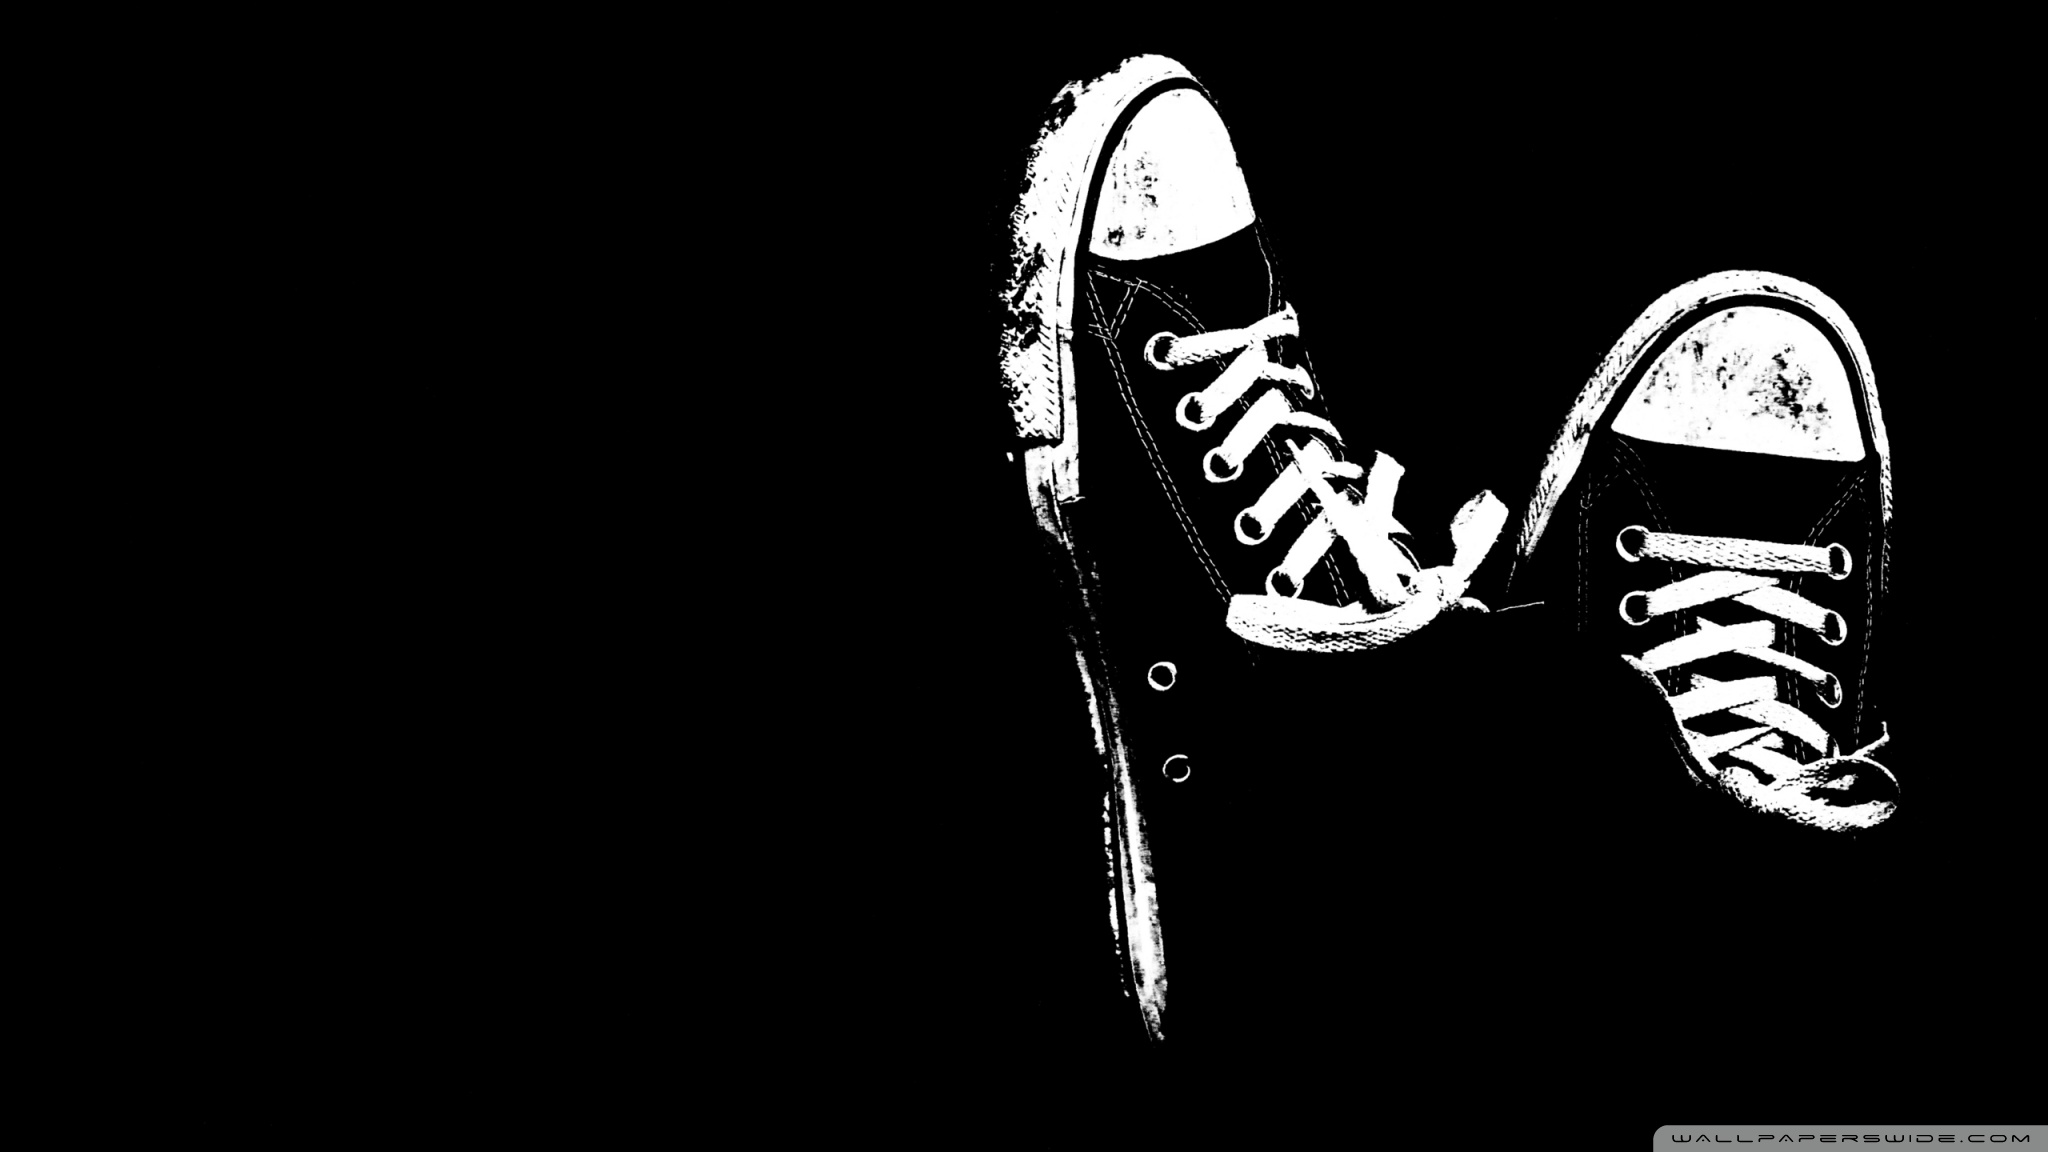 Sneakers Black And White Ultra Hd Desktop Background Wallpaper For